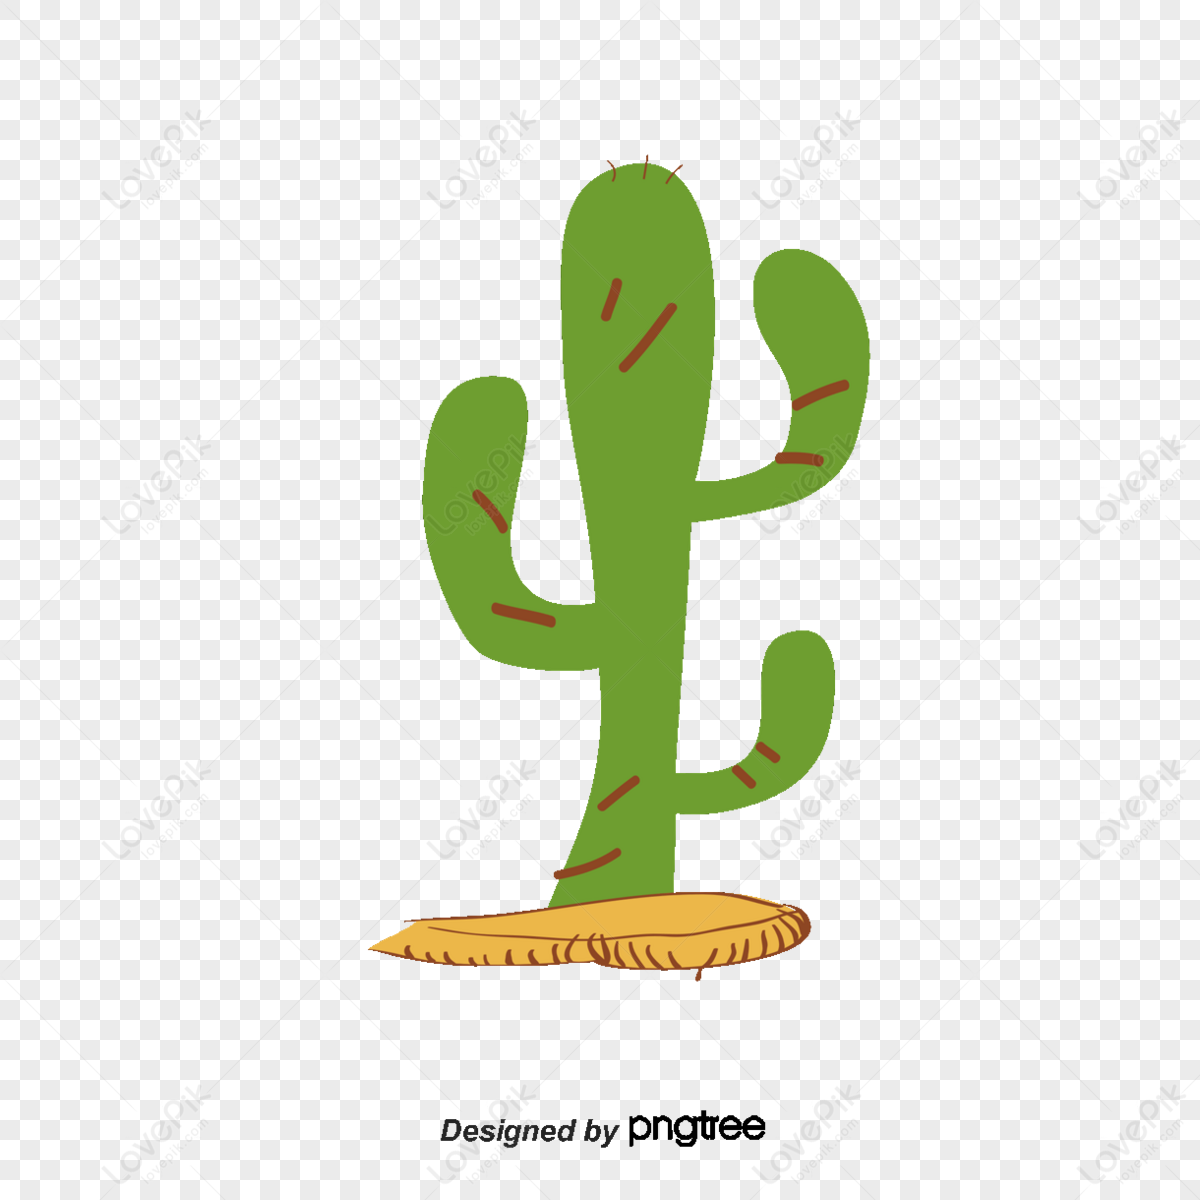 Cactus Silhouette PNG And Vector Images Free Download - Pngtree